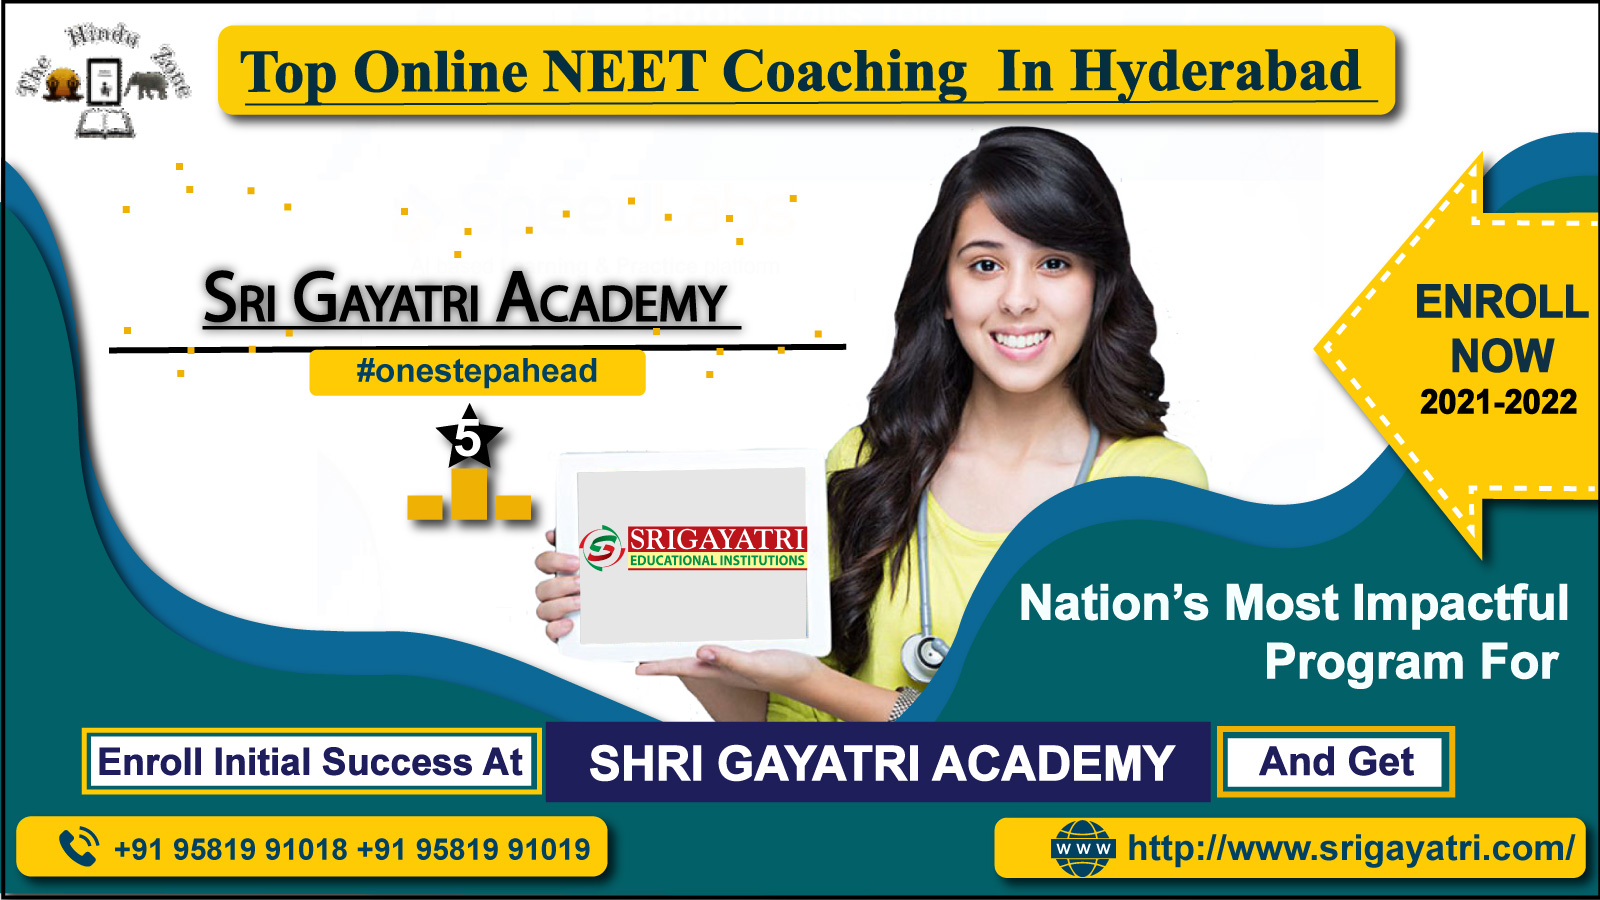 top online coaching Centres for neet preparation